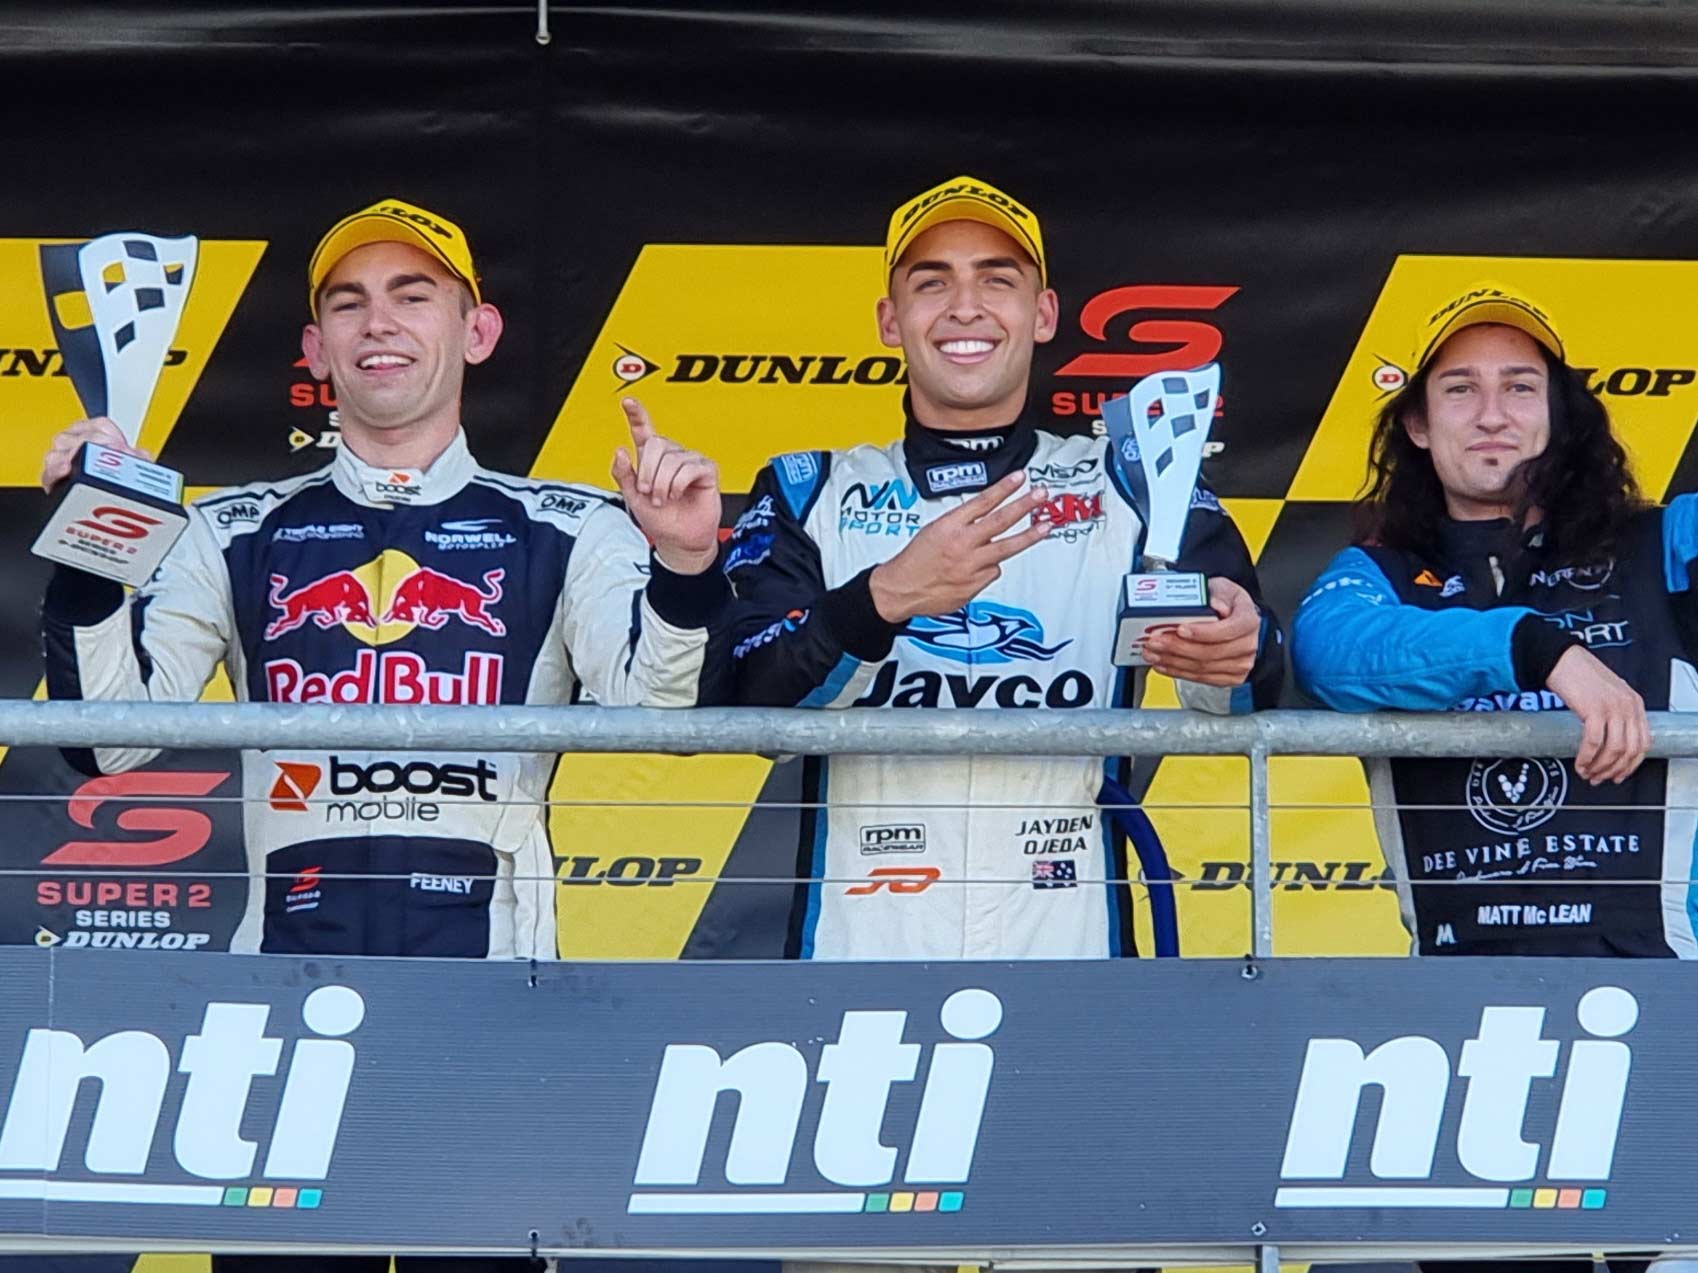 Podiums highlight a mixed weekend for MW Motorsport